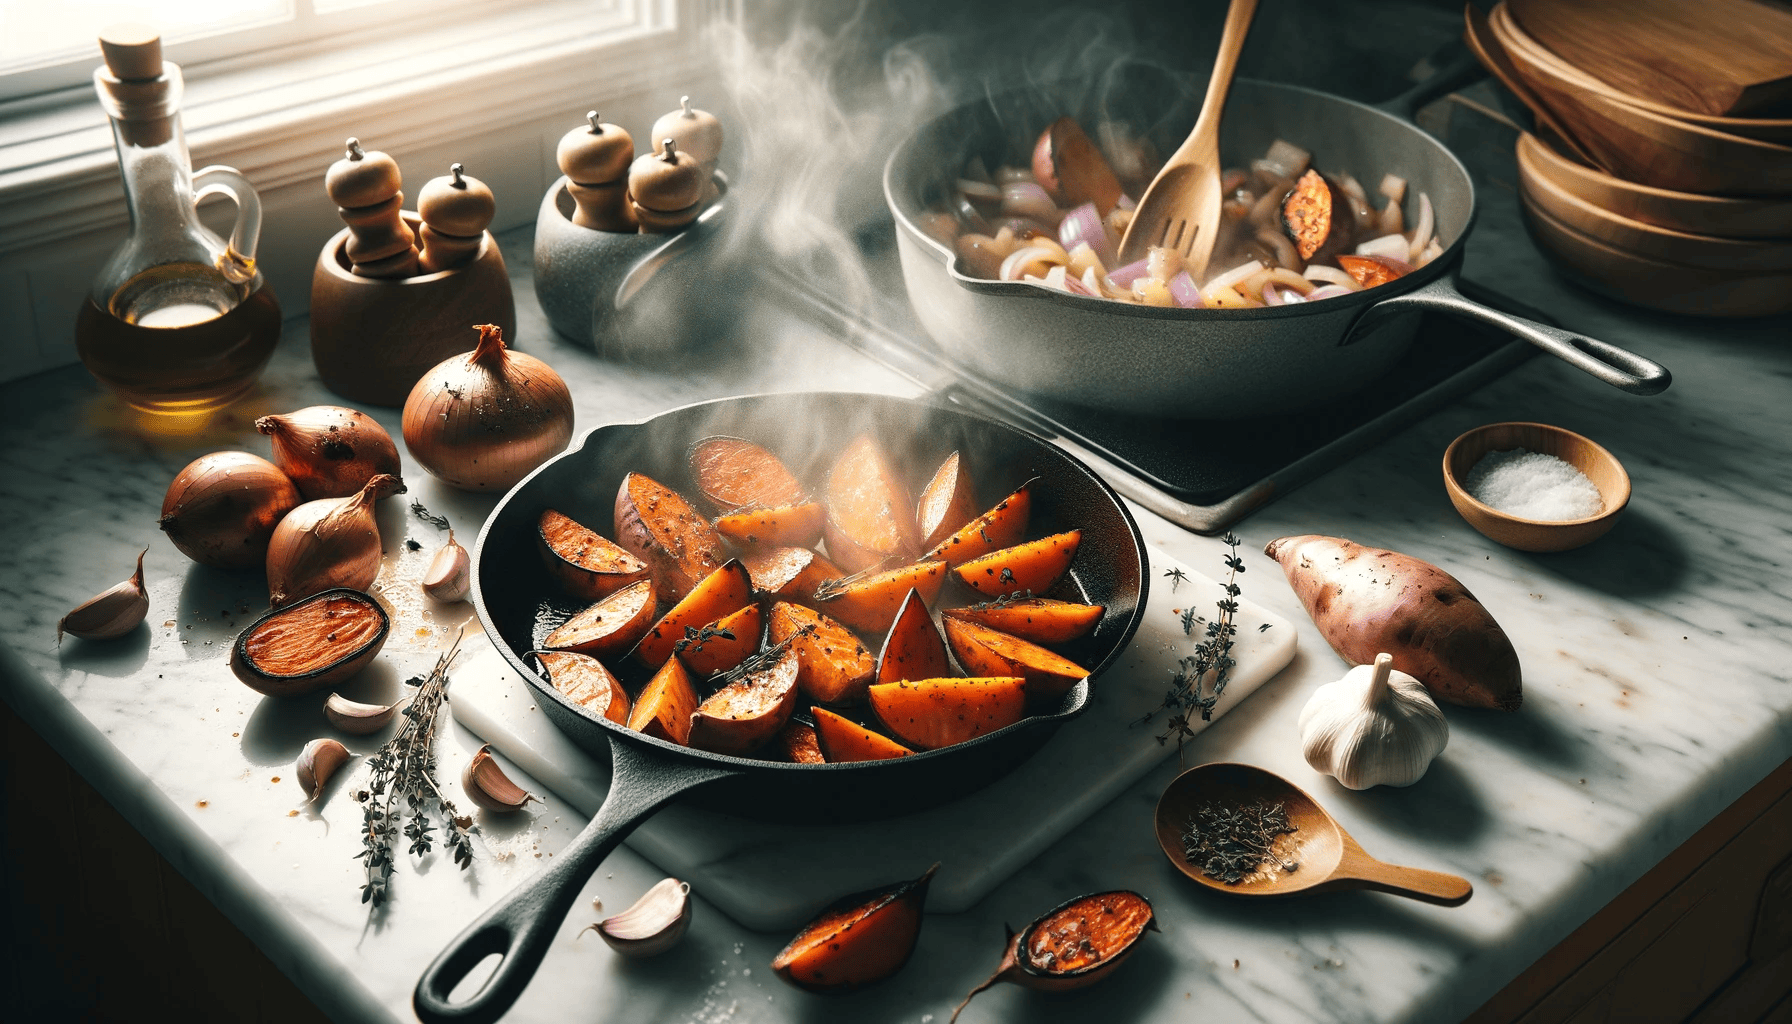 Sweet potatoes roasted to a golden hue on a marble countertop beside a skillet with sautéed onions and herbs